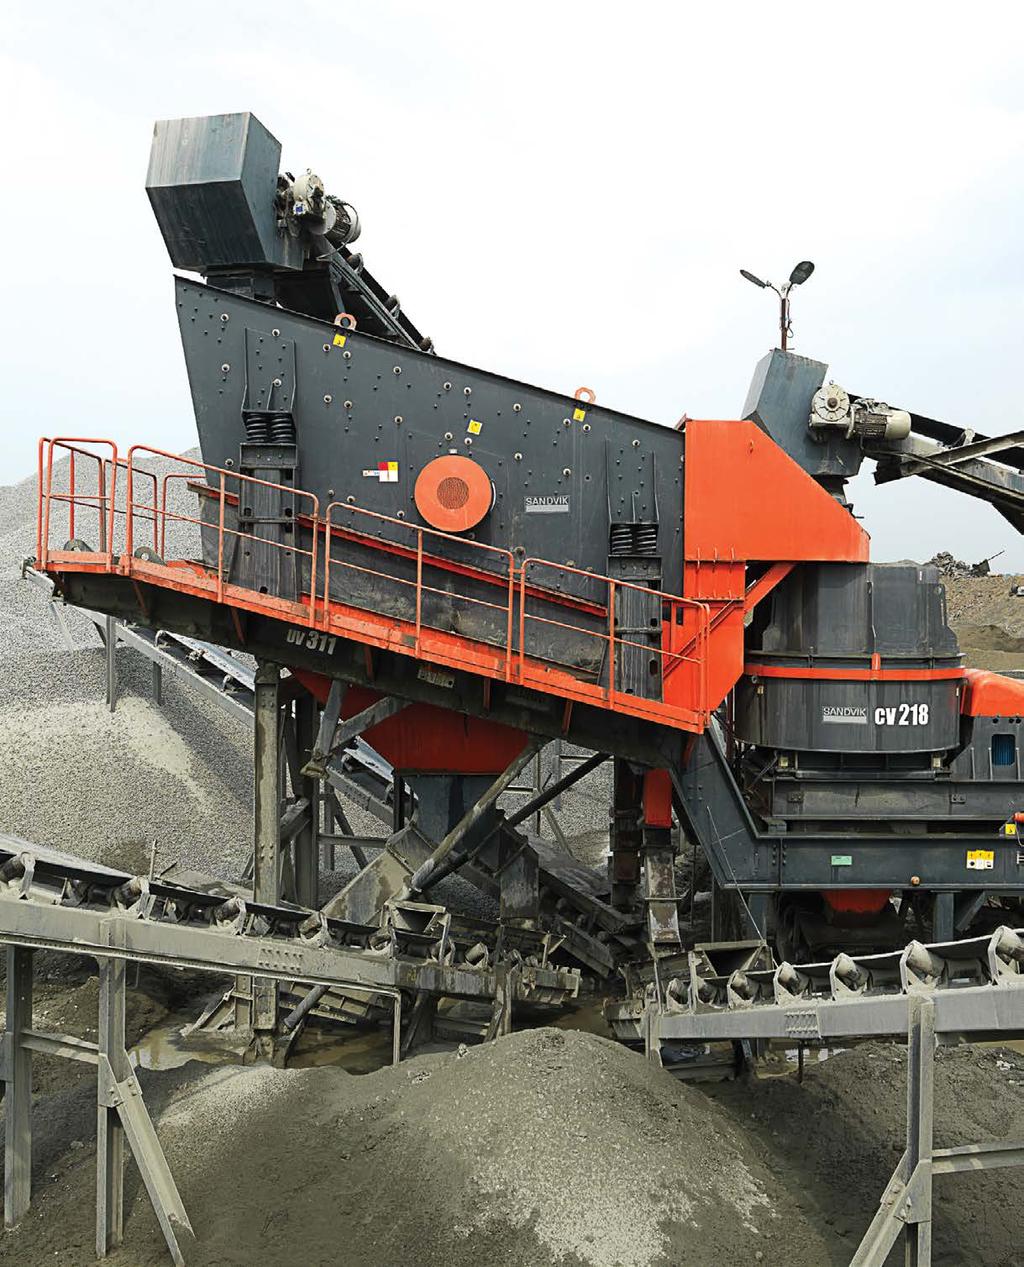 VSI IMPACT CRUSHER VSI IMPACT CRUSHER AND SCREENING UNIT Our VSI range of wheeled units combine our state of the art VSI crusher technology with a Sandvik screen to provide